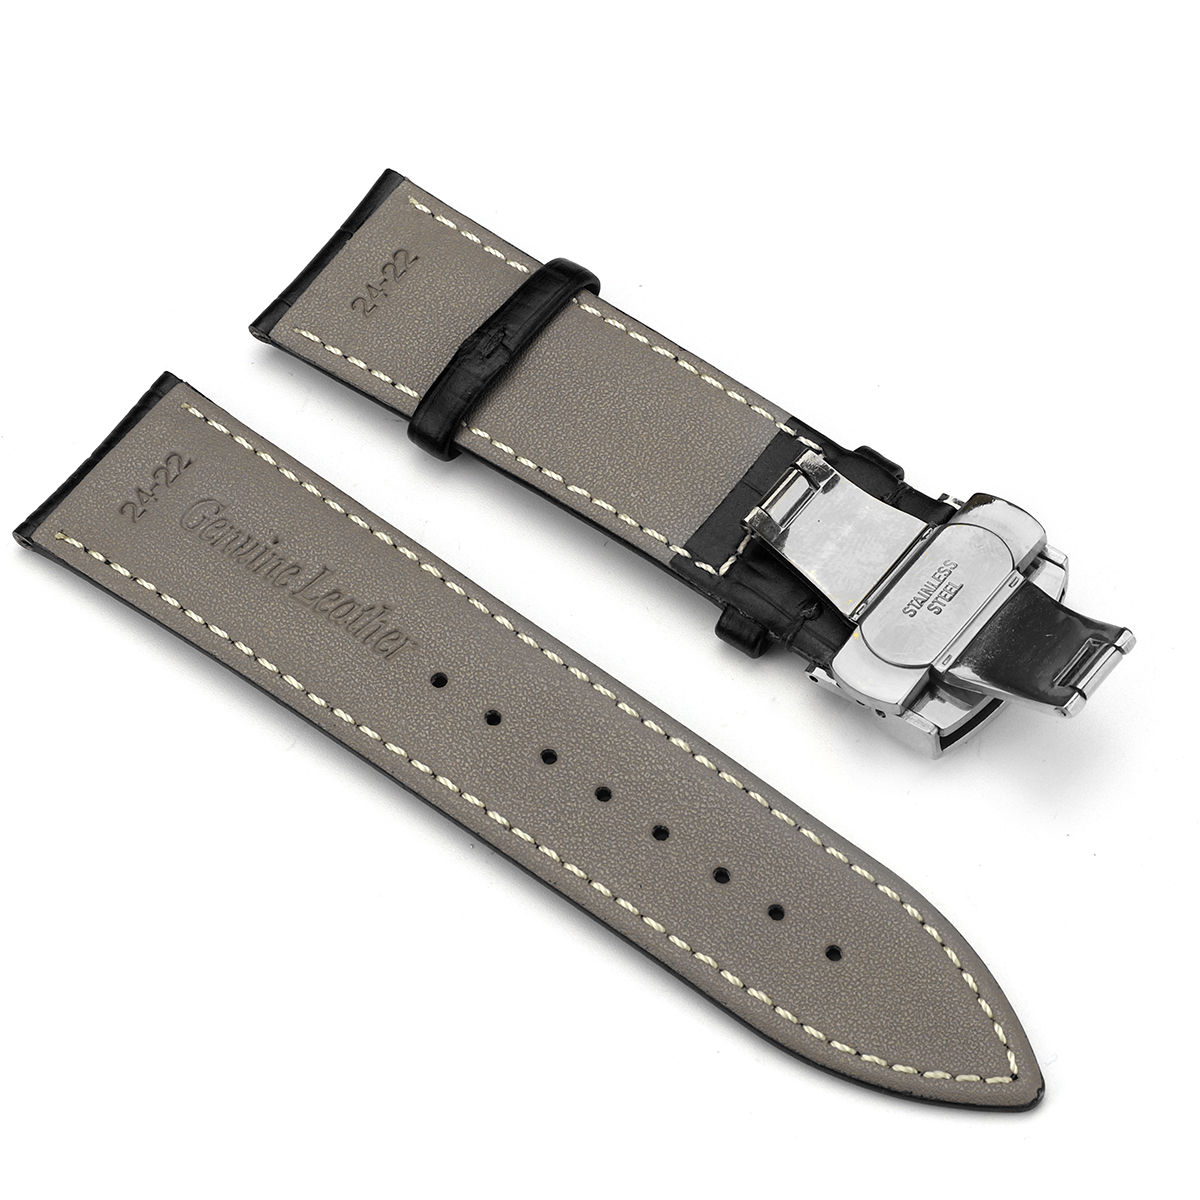 Bakeey-22-24mm-Width-Butterfly-Buckle-Genuine-Leather-Watch-Band-Strap-Replacement-1659214-6